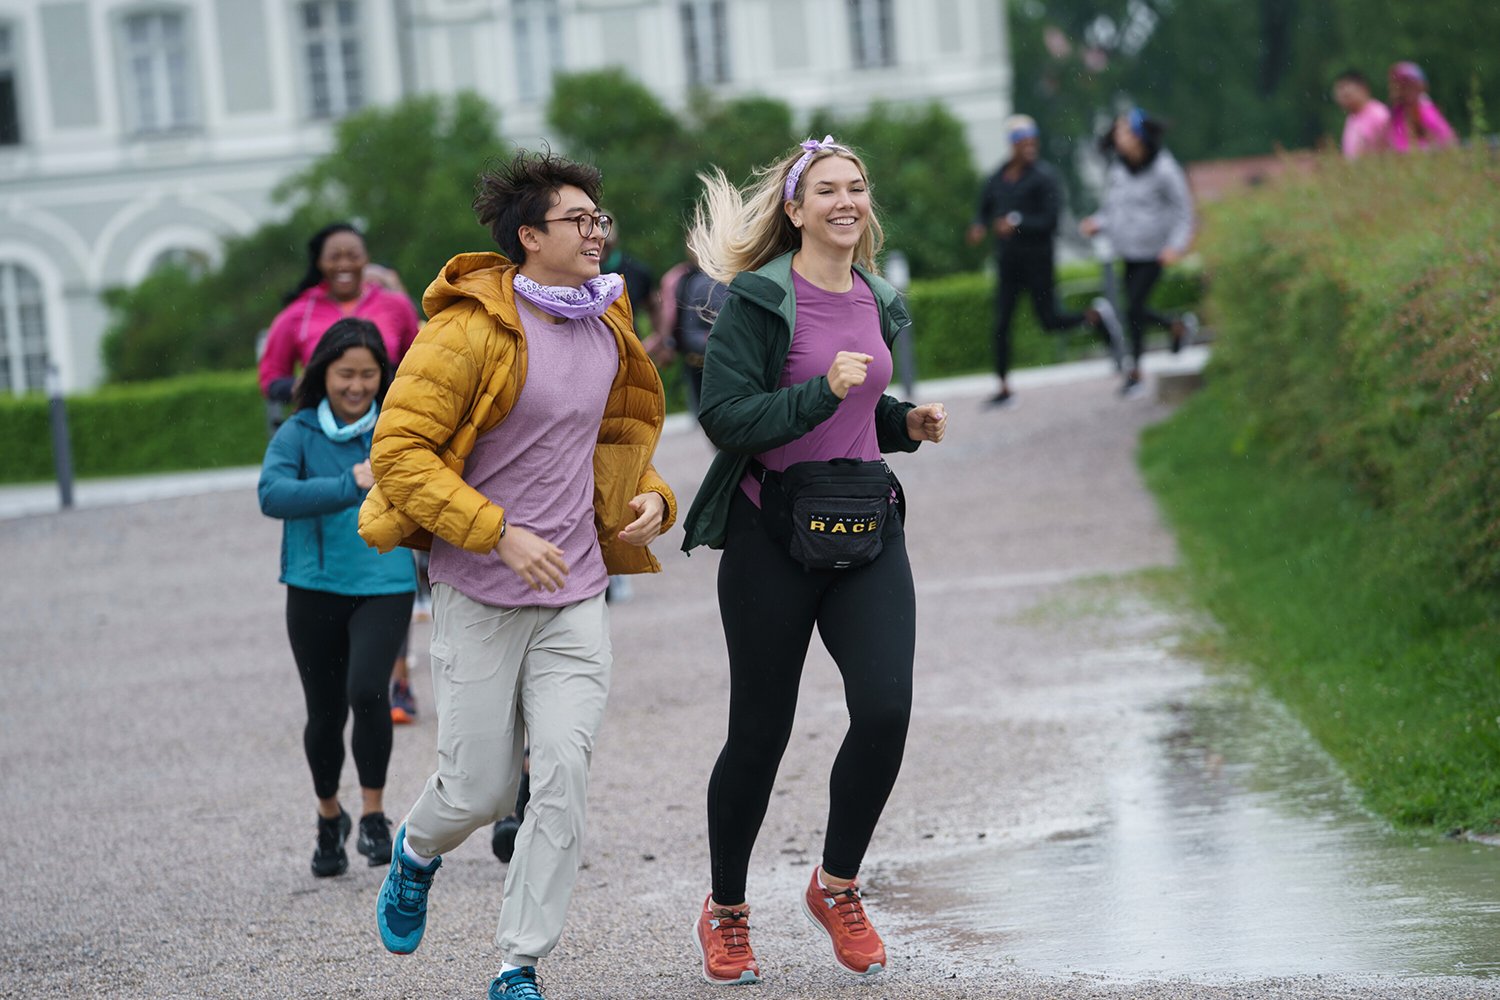 Derek Xiao and Claire Rehfuss on The Amazing Race Season 34